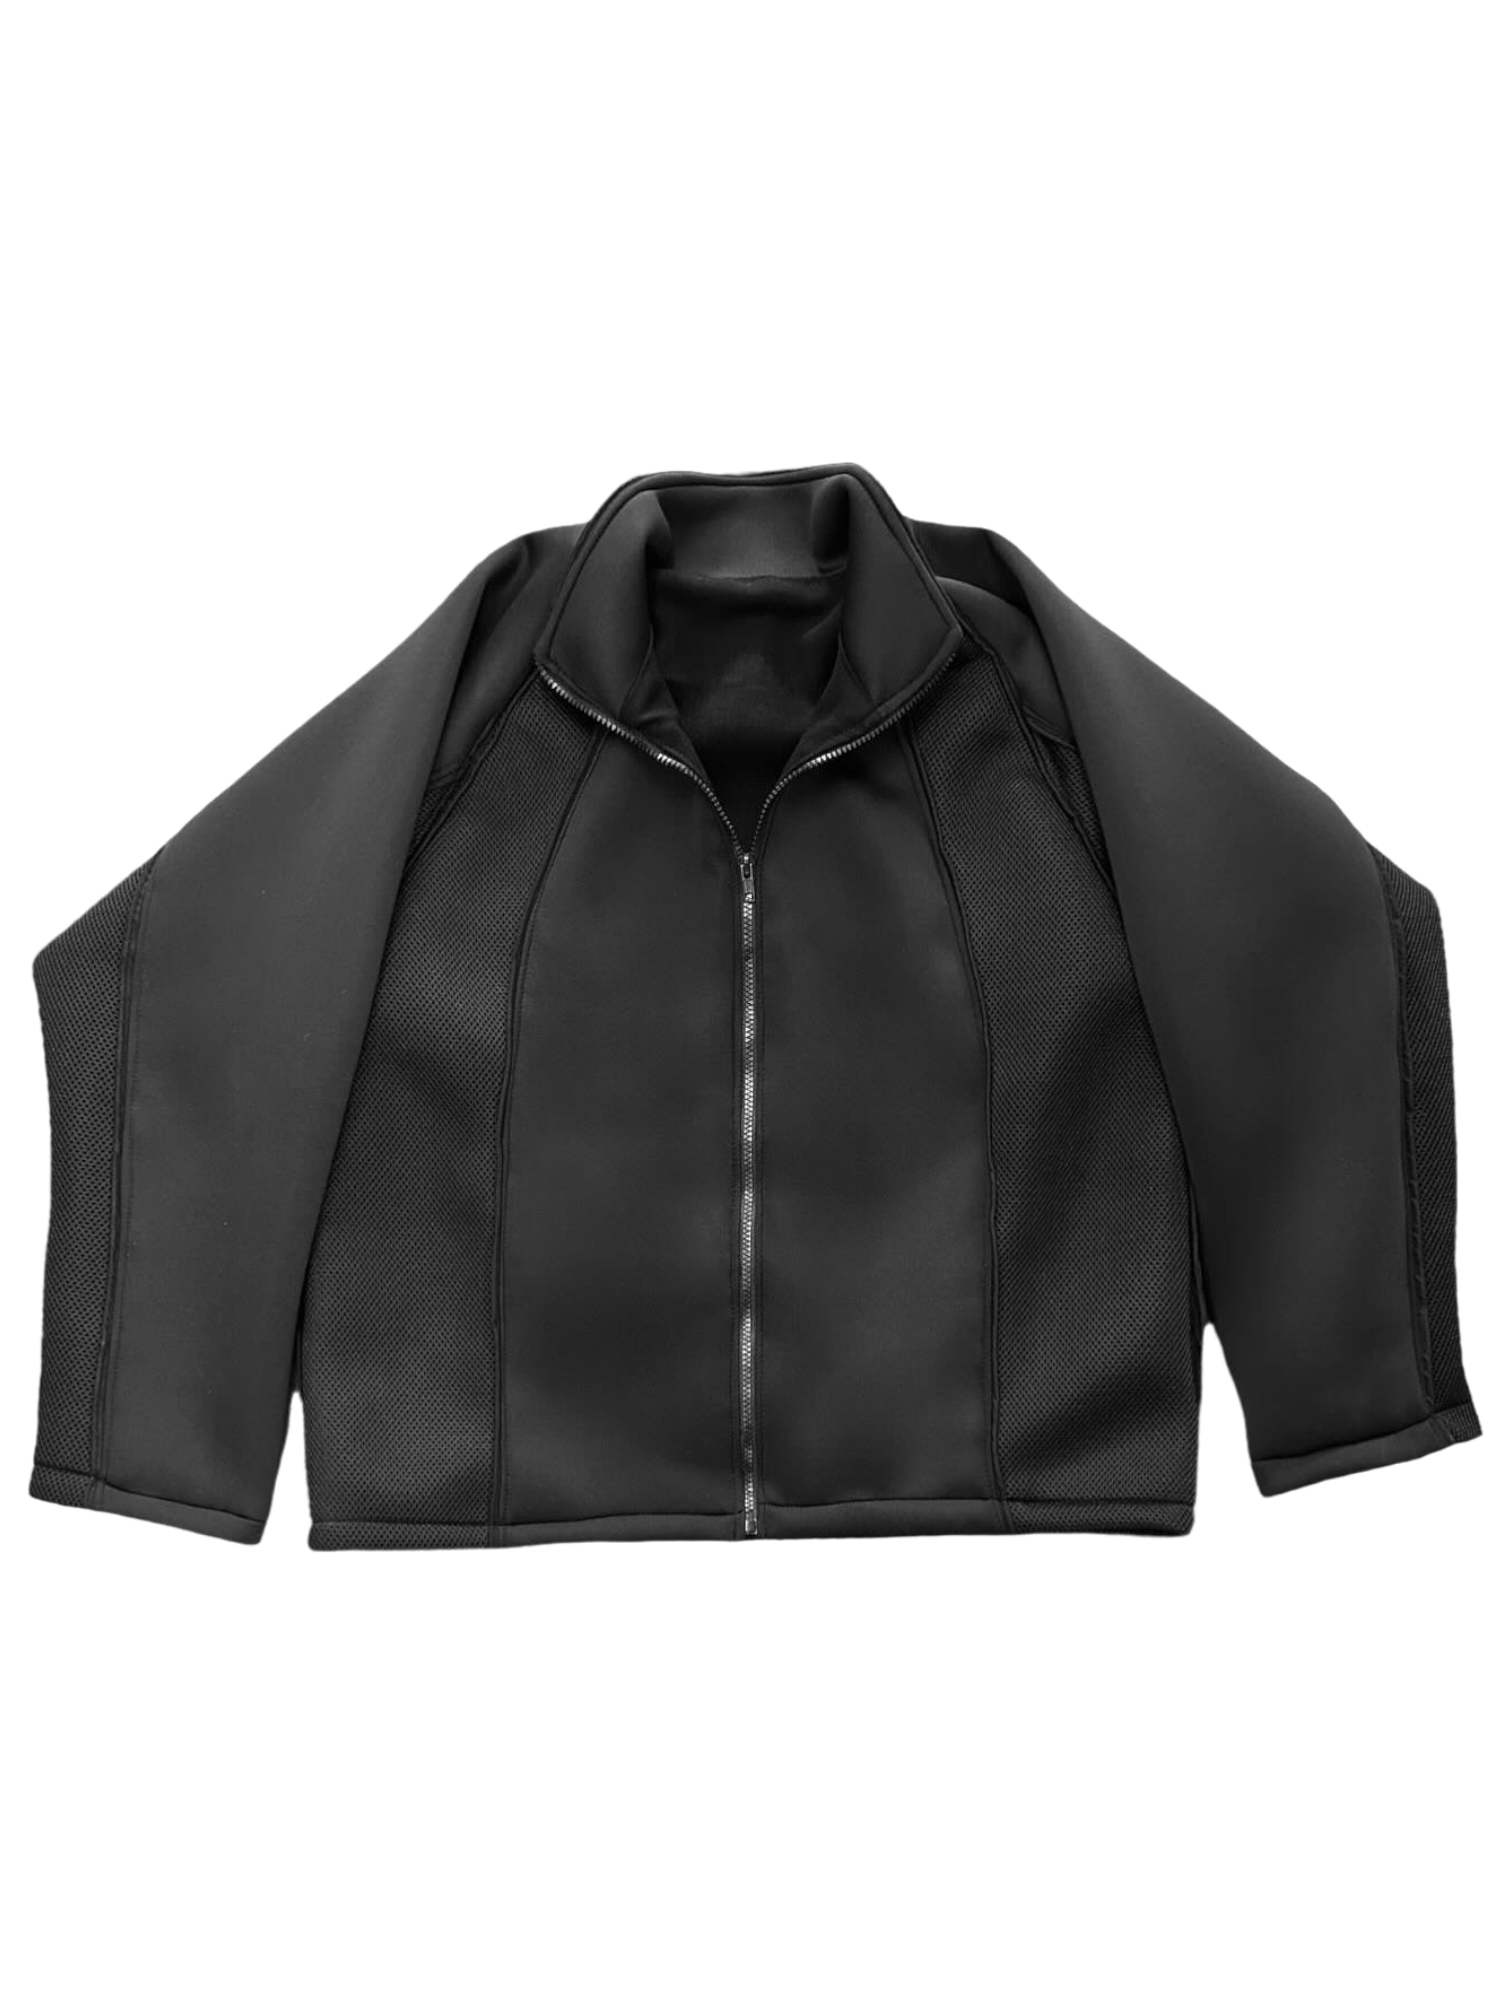 MOISTURE WICKING FOAM ZIP-UP WITH PERFORATION